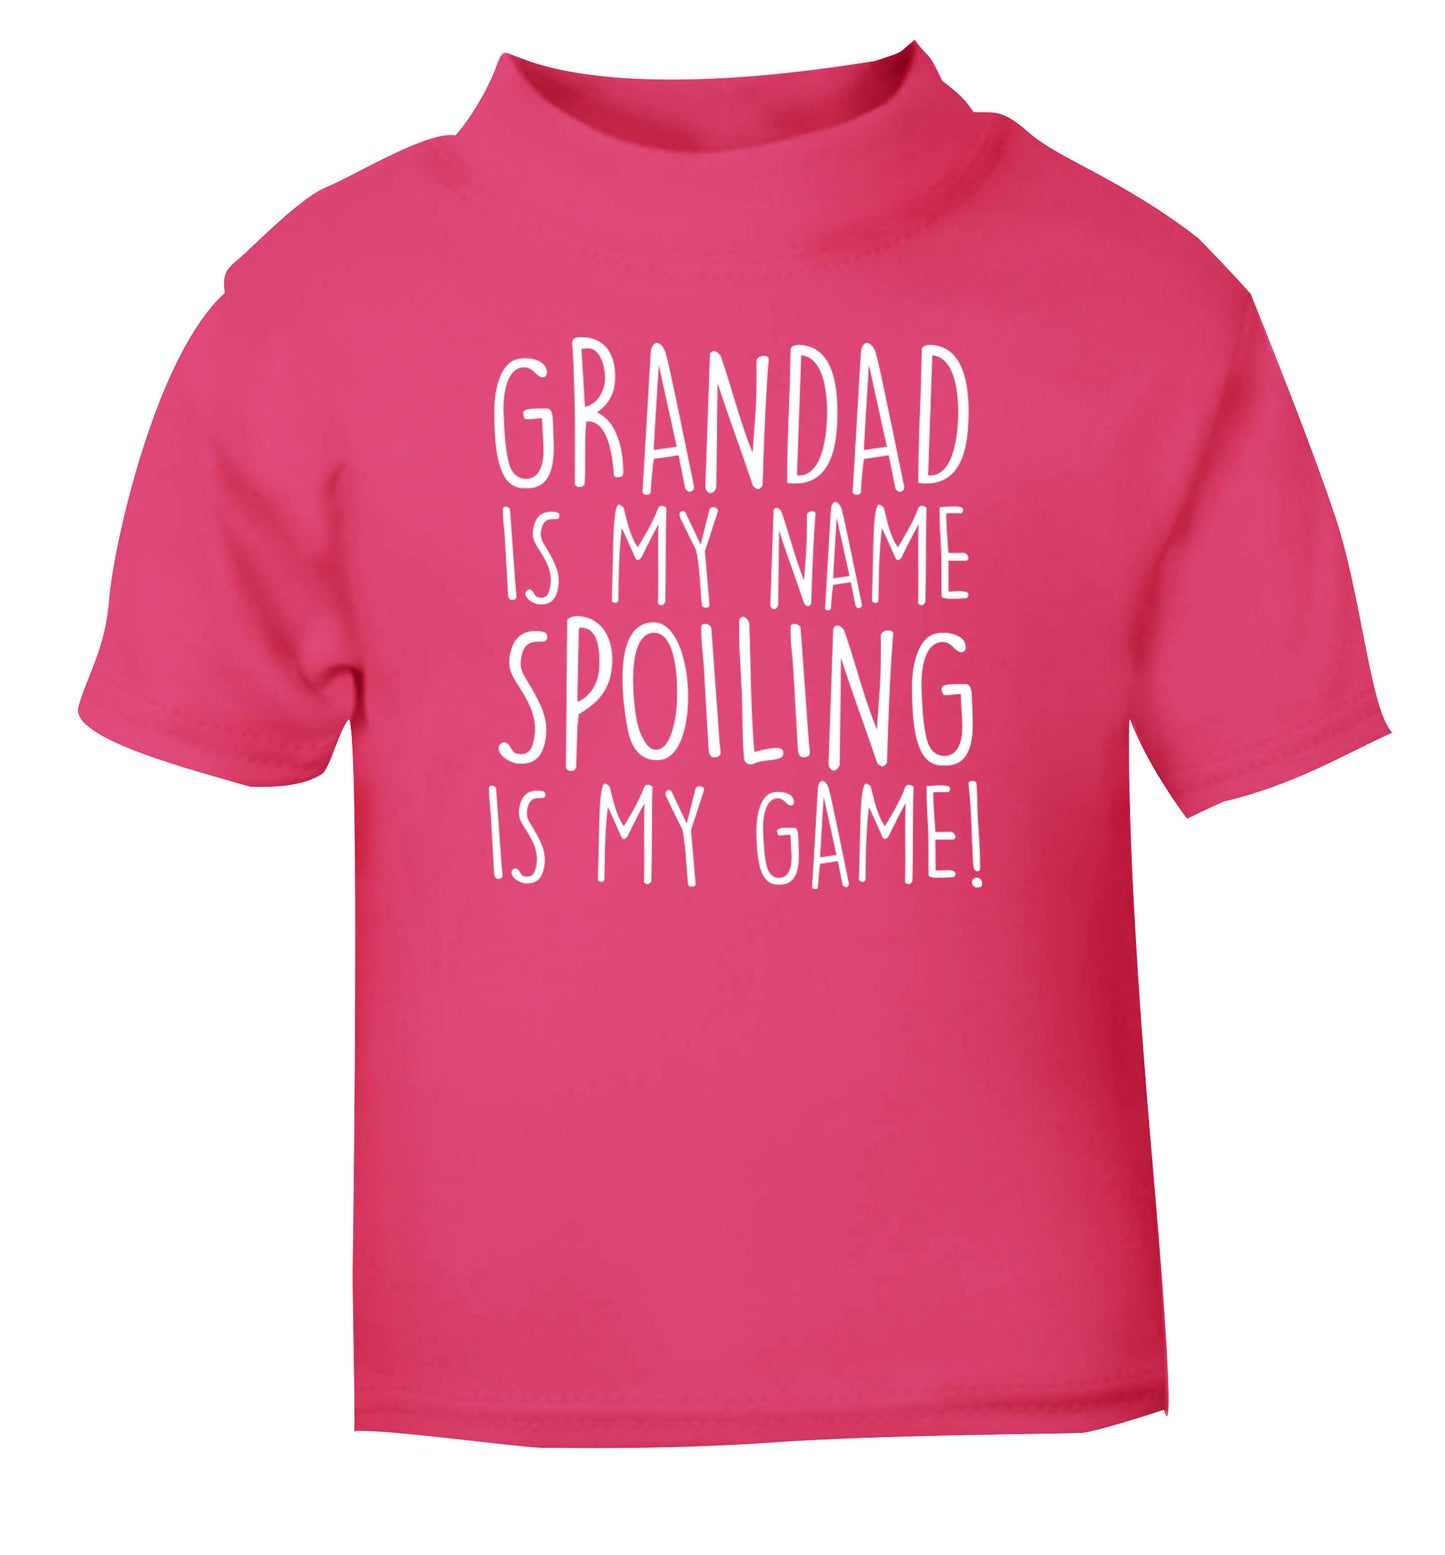 Grandad is my name, spoiling is my game pink Baby Toddler Tshirt 2 Years